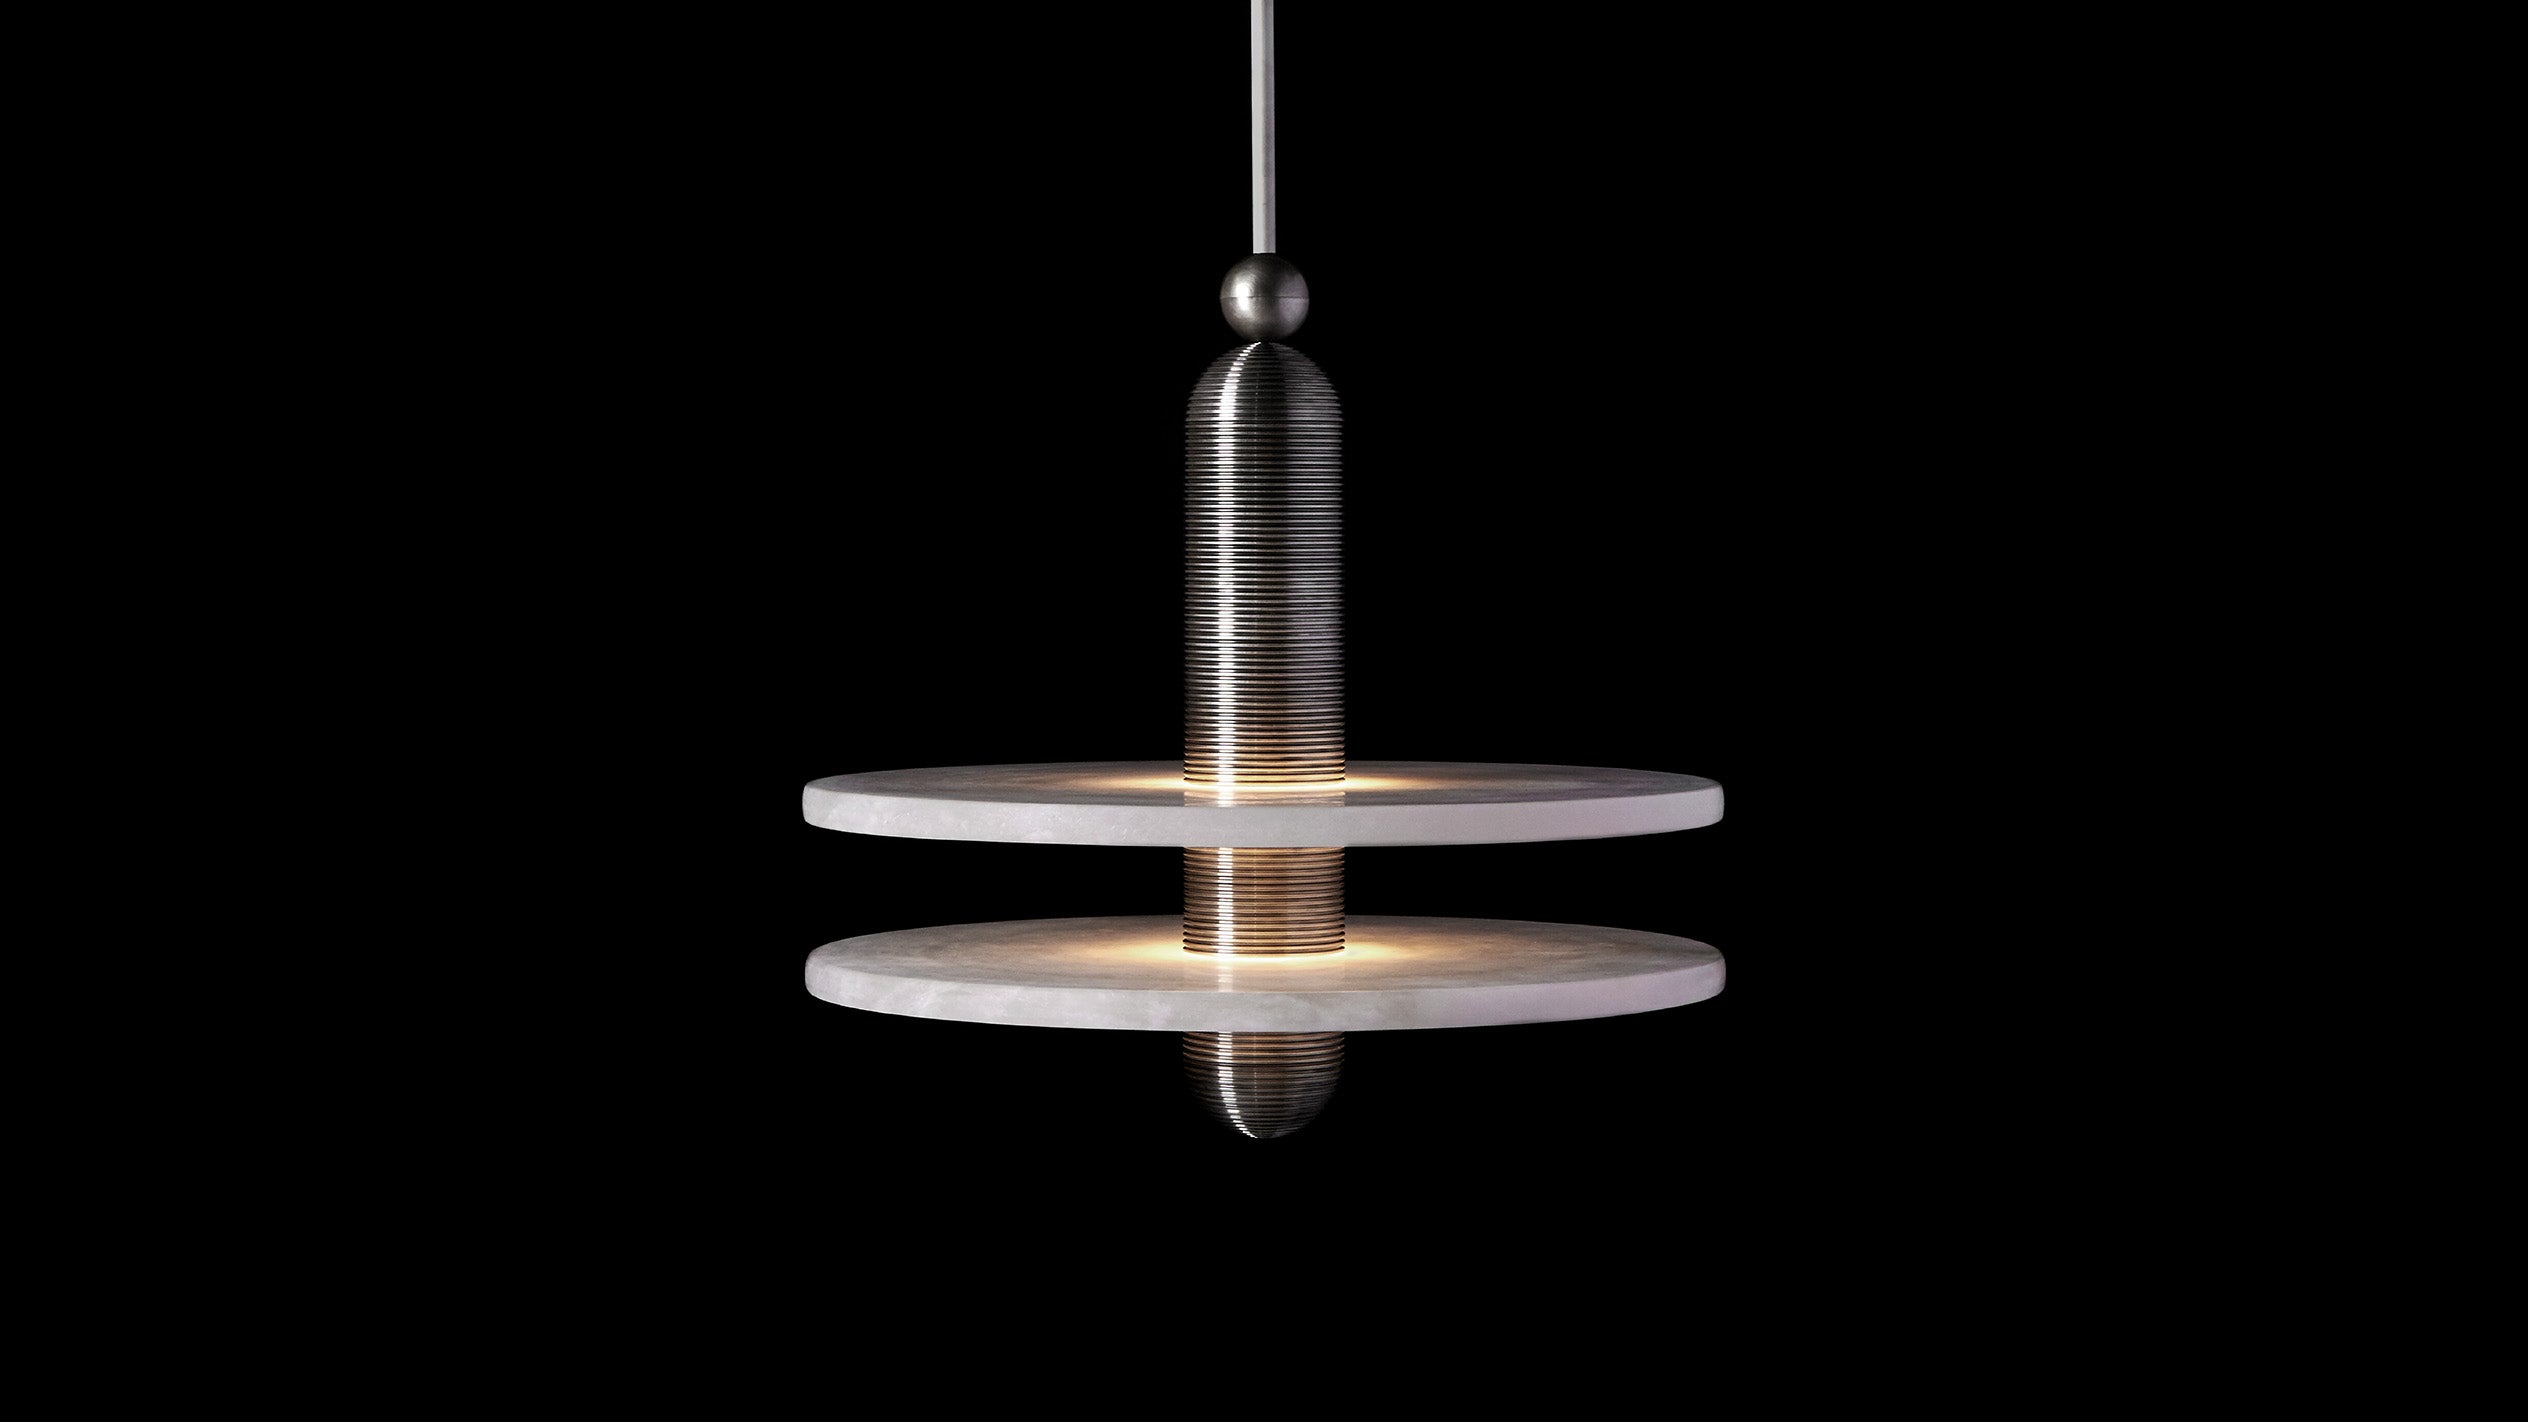 MEDIAN : 1 ceiling pendant in Tarnished Silver finish hanging against a black background. 